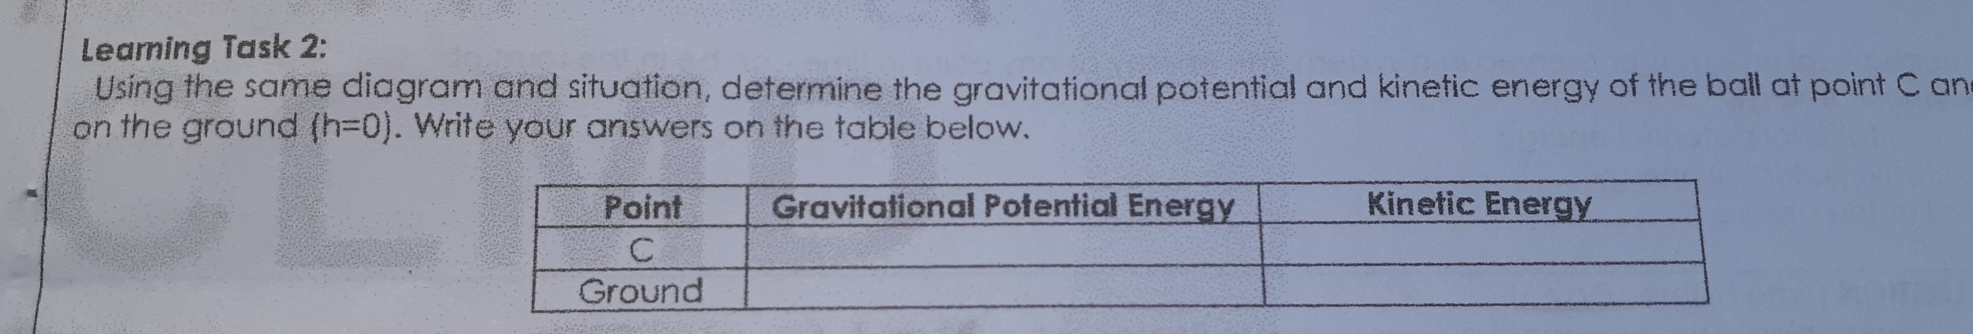 Leaming Task 2: Using the same diagram and situation, determine the gravitational potential and kinetic energy of the ball at point C an on the ground h=0 . Write your answers on the table below. Point Gravitational Potential Energy Kinetic Energy C Ground